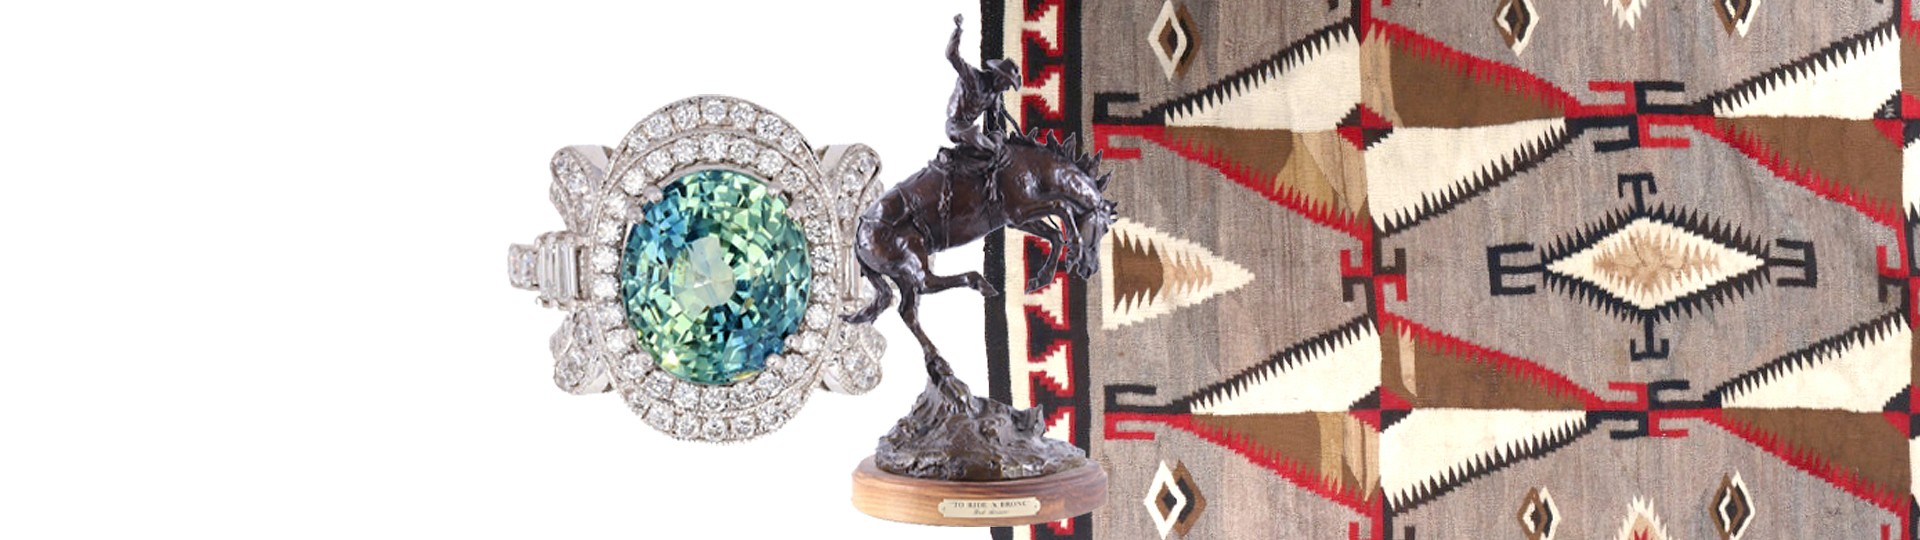 Old West Frontier & American Indian Sale w/ Luxury Jewelry - June 27th 2020 by North American Auction Company